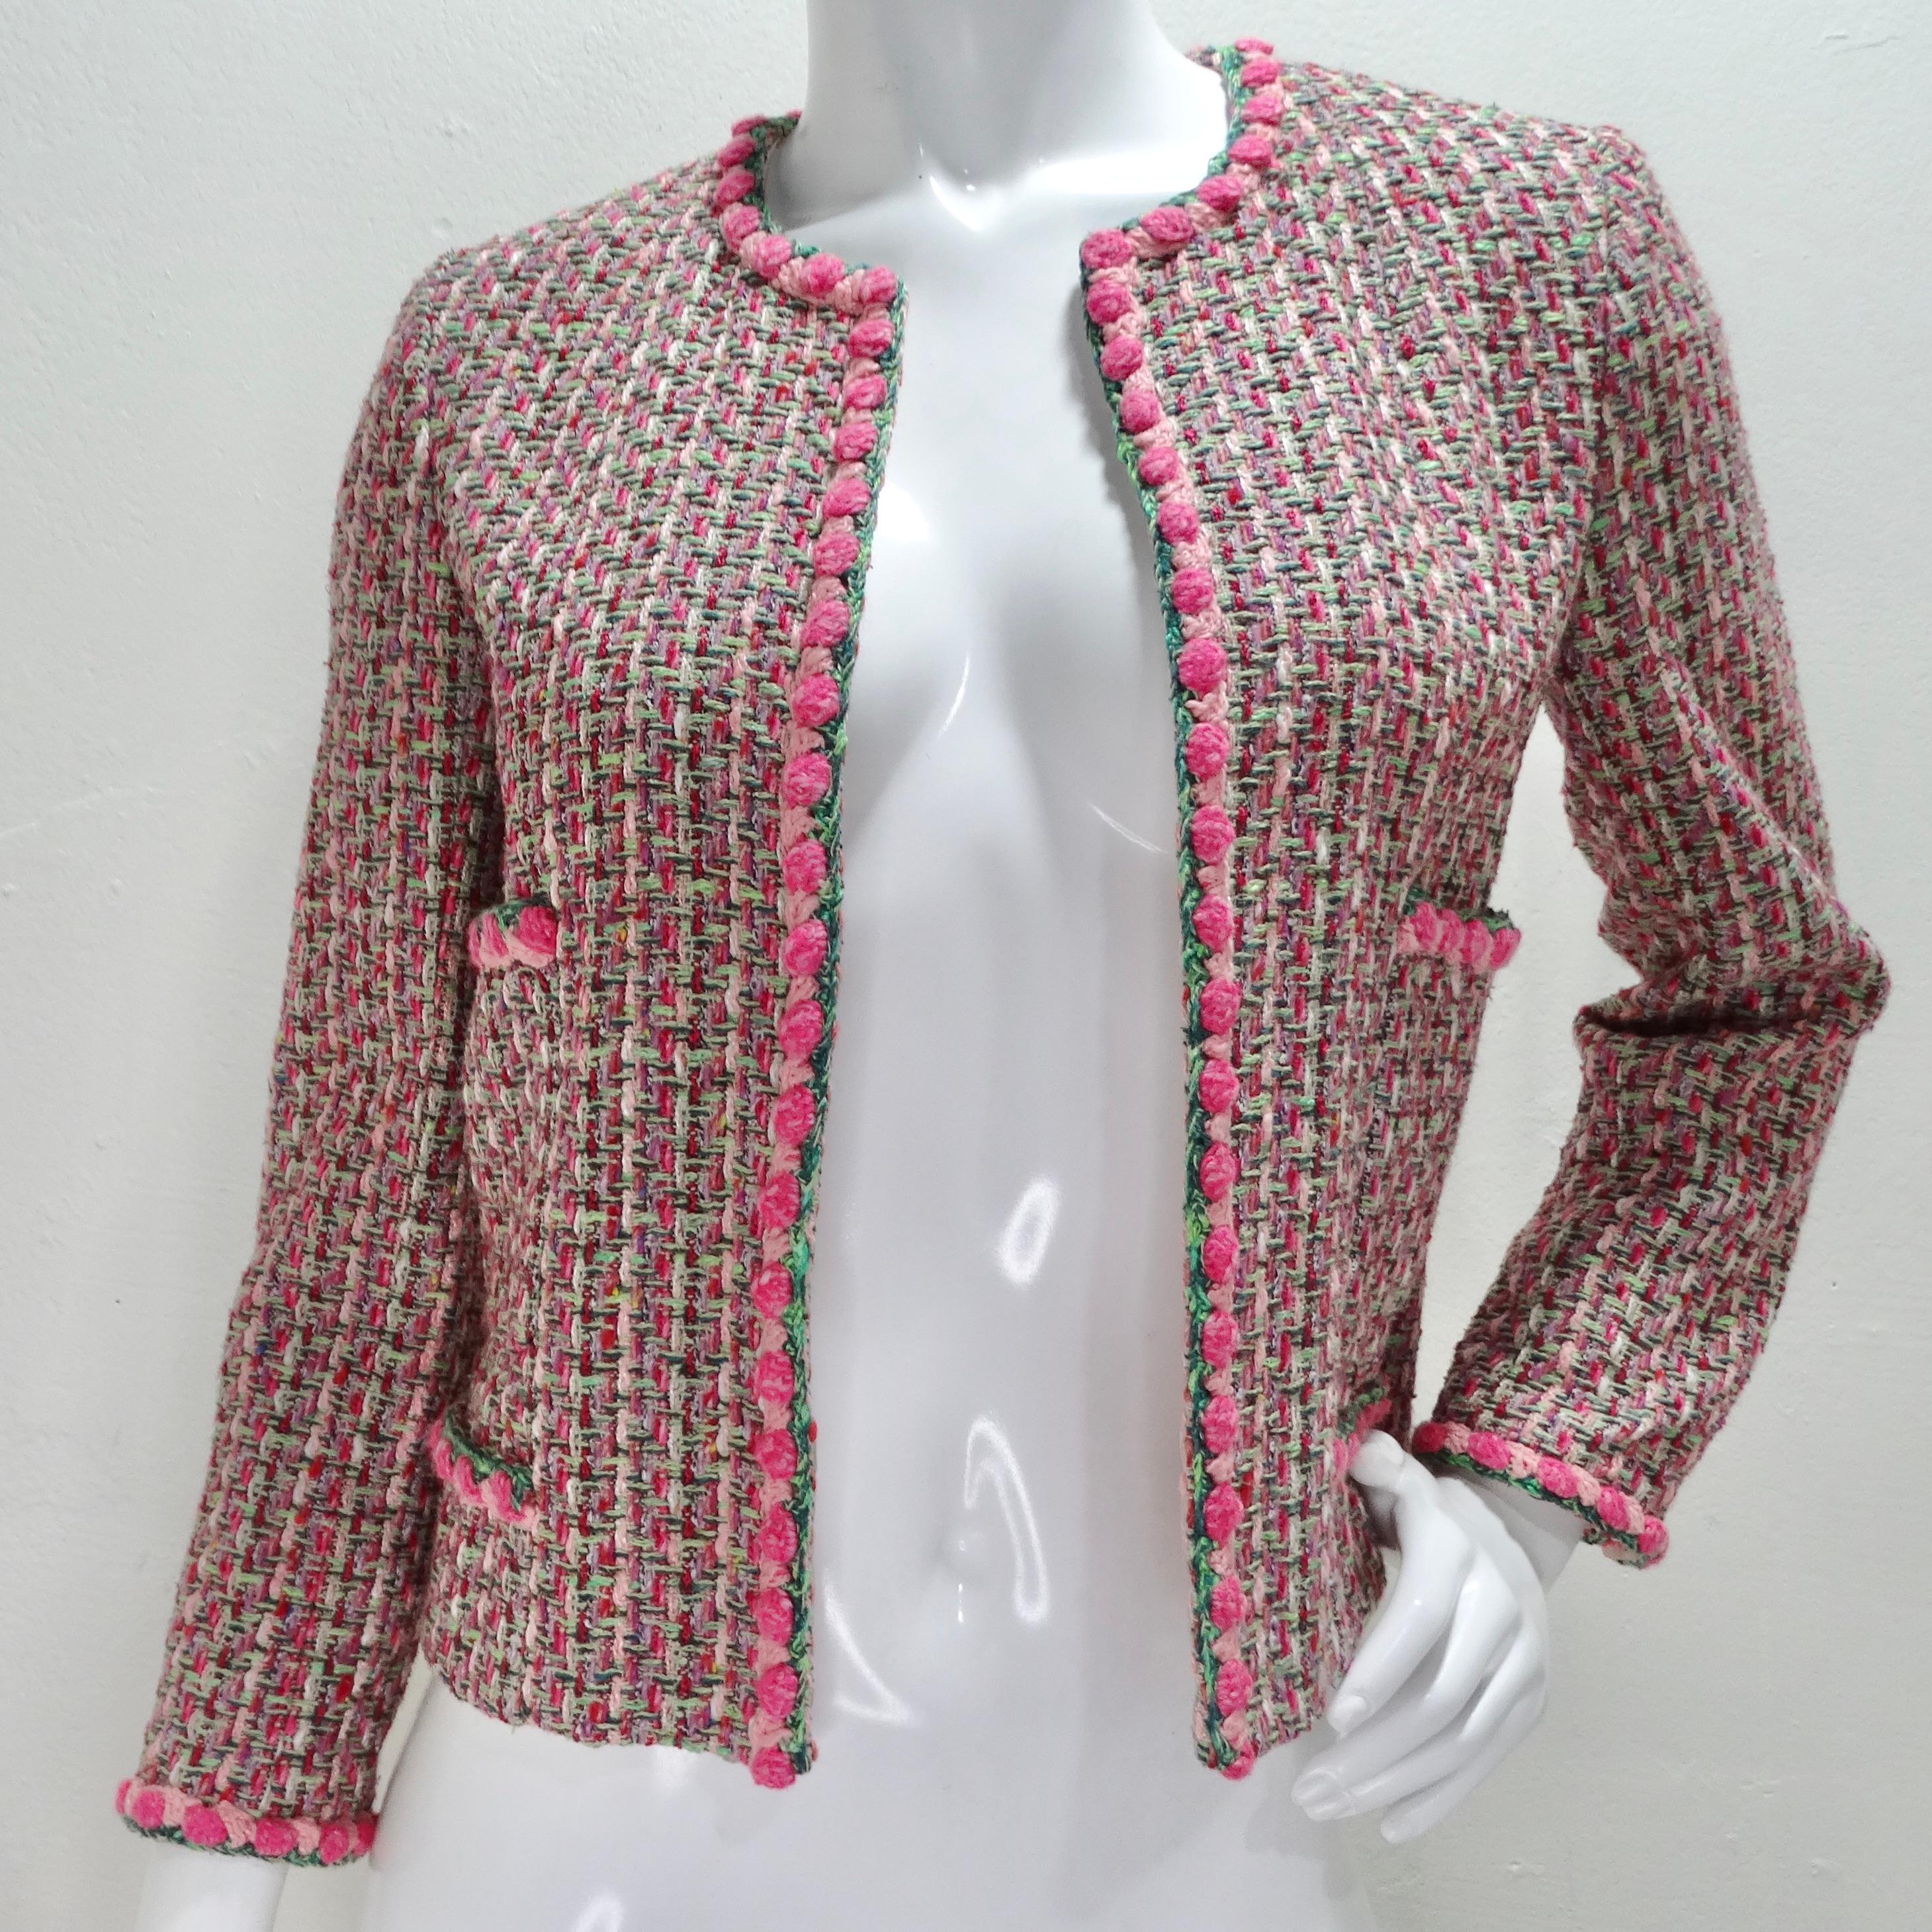 Chanel 2002 Pink Tweed Evening Jacket For Sale 1